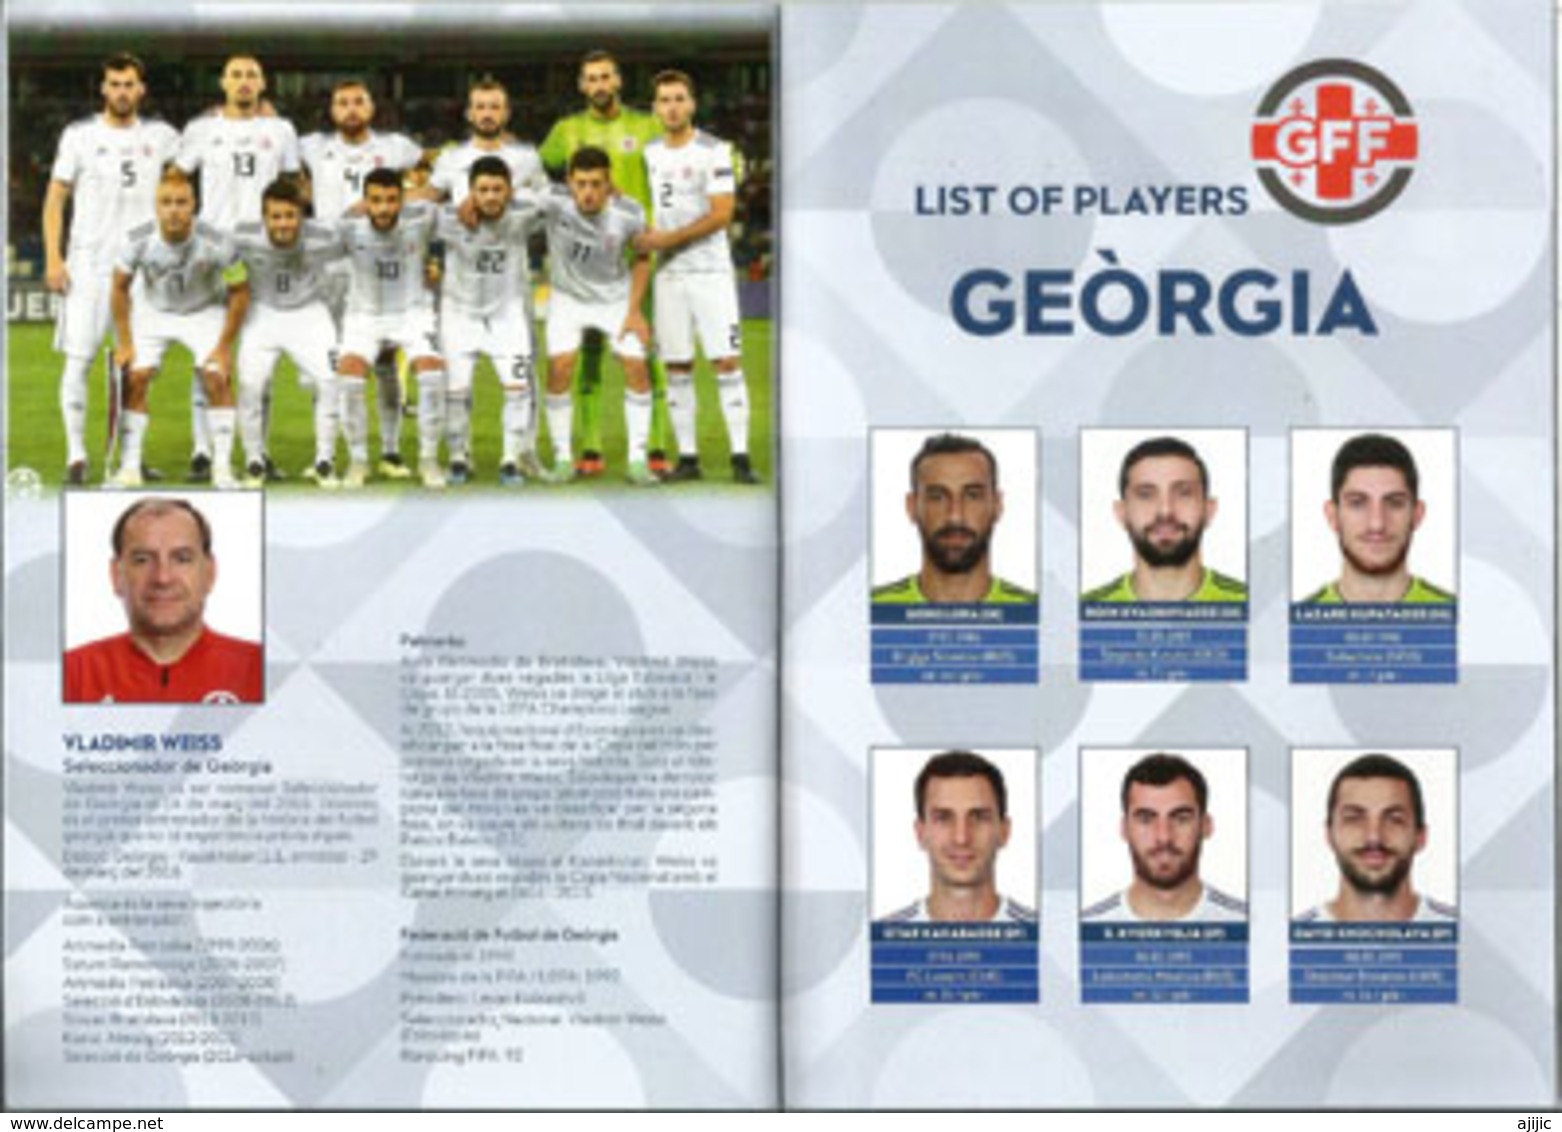 UEFA NATIONS LEAGUE 2018/19. ANDORRA-GEORGIA, BOOKLET 16 PAGES LUXE, Disponible Seuls Aux Tickets VIP.ONE AVAILABLE - Boeken